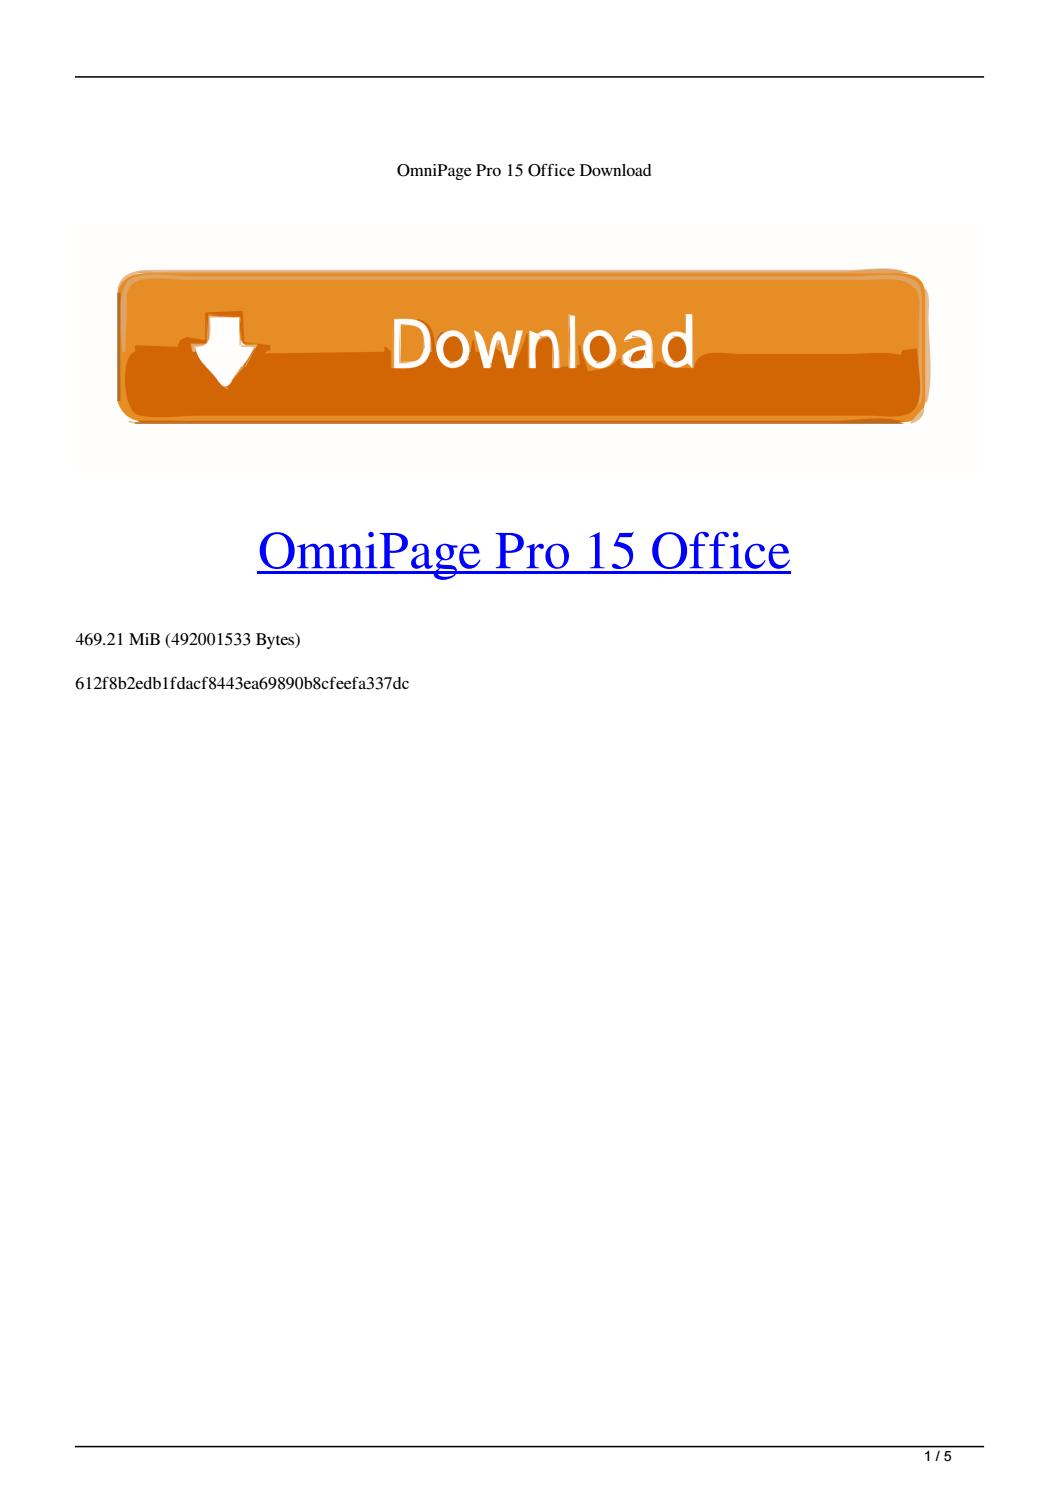 omnipage pro 18.1 download